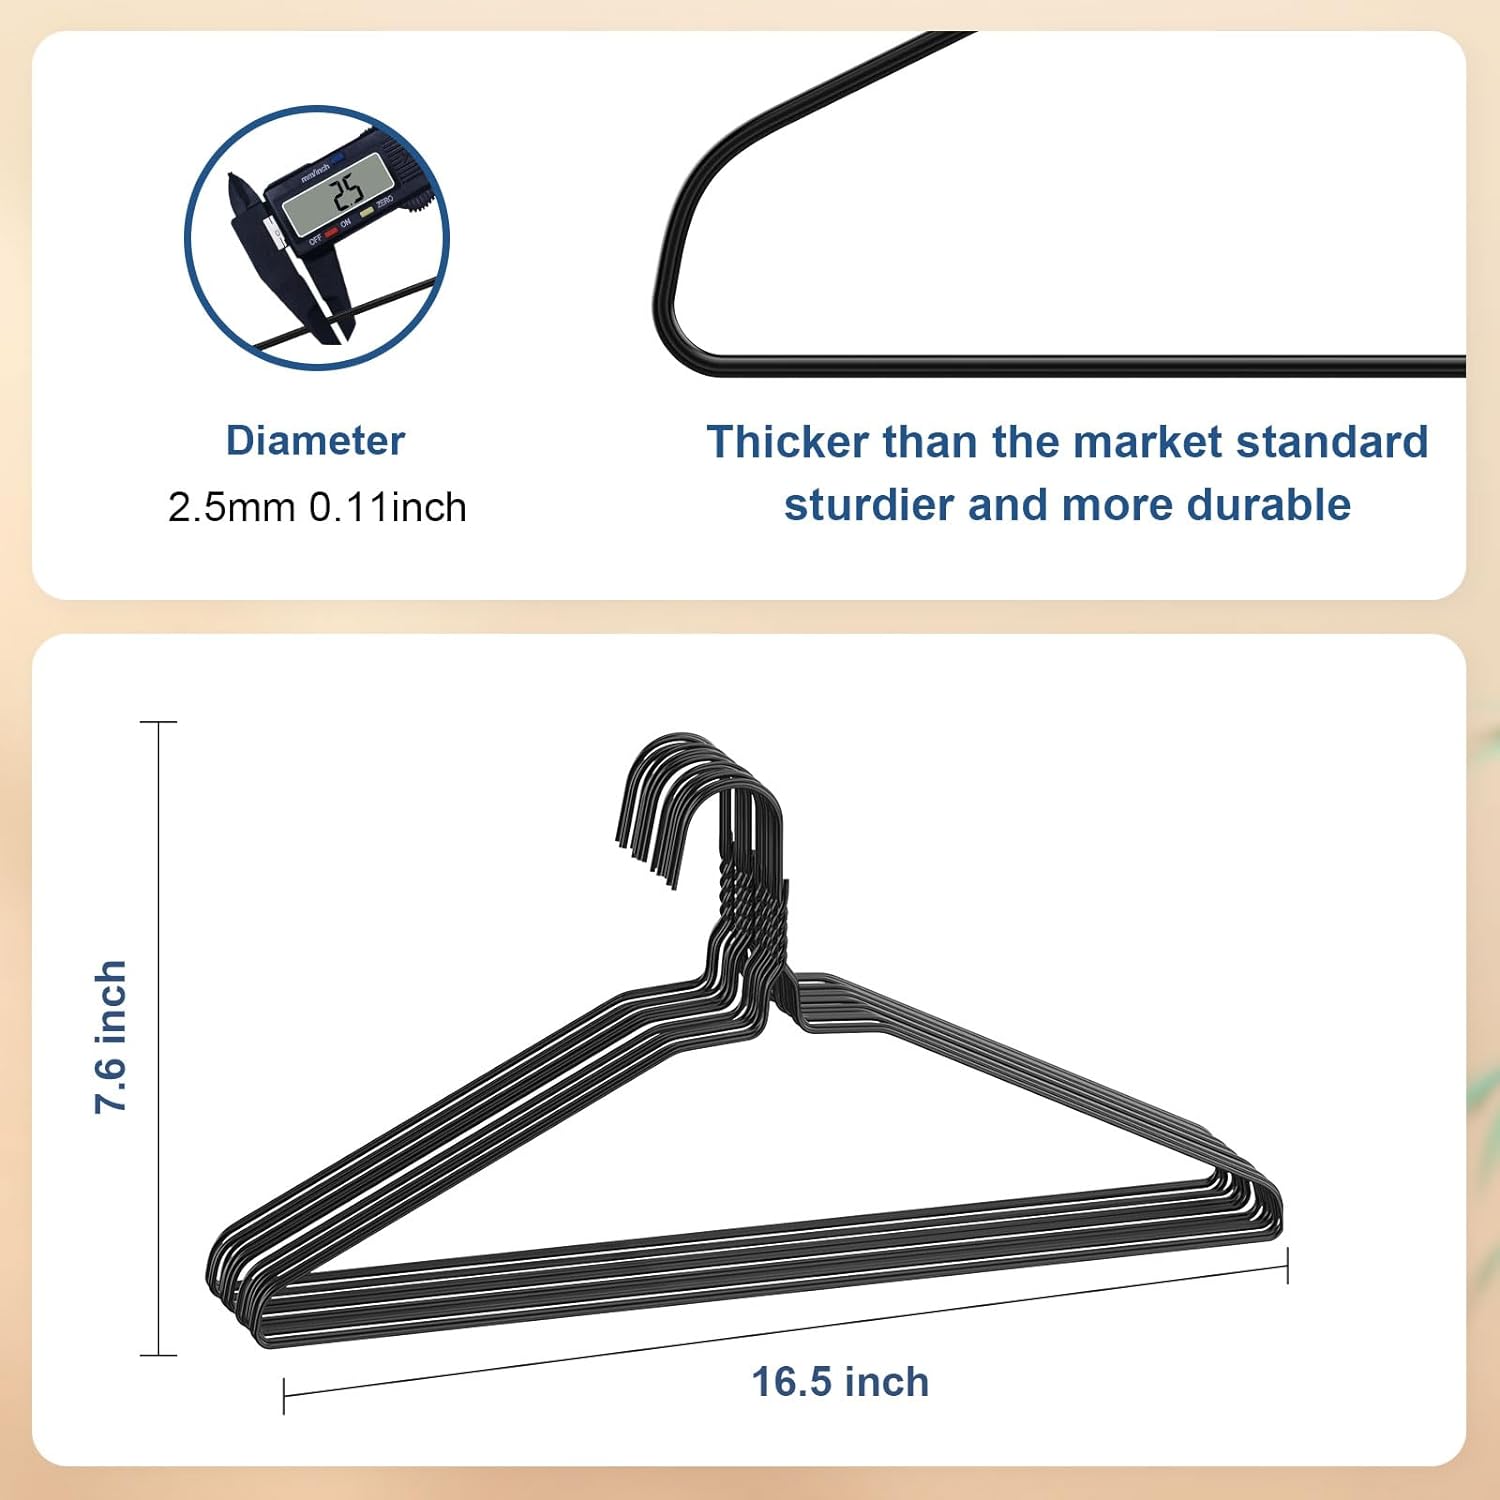 SPECILITE Wire Hangers 100 Pack, Metal Wire Clothes Hanger Bulk for Coats,  Space Saving Metal Hangers Non Slip 16 Inch 12 Gauge Ultra Thin for  Standard Size Suits, Shirts, Pants, Skirts-Black